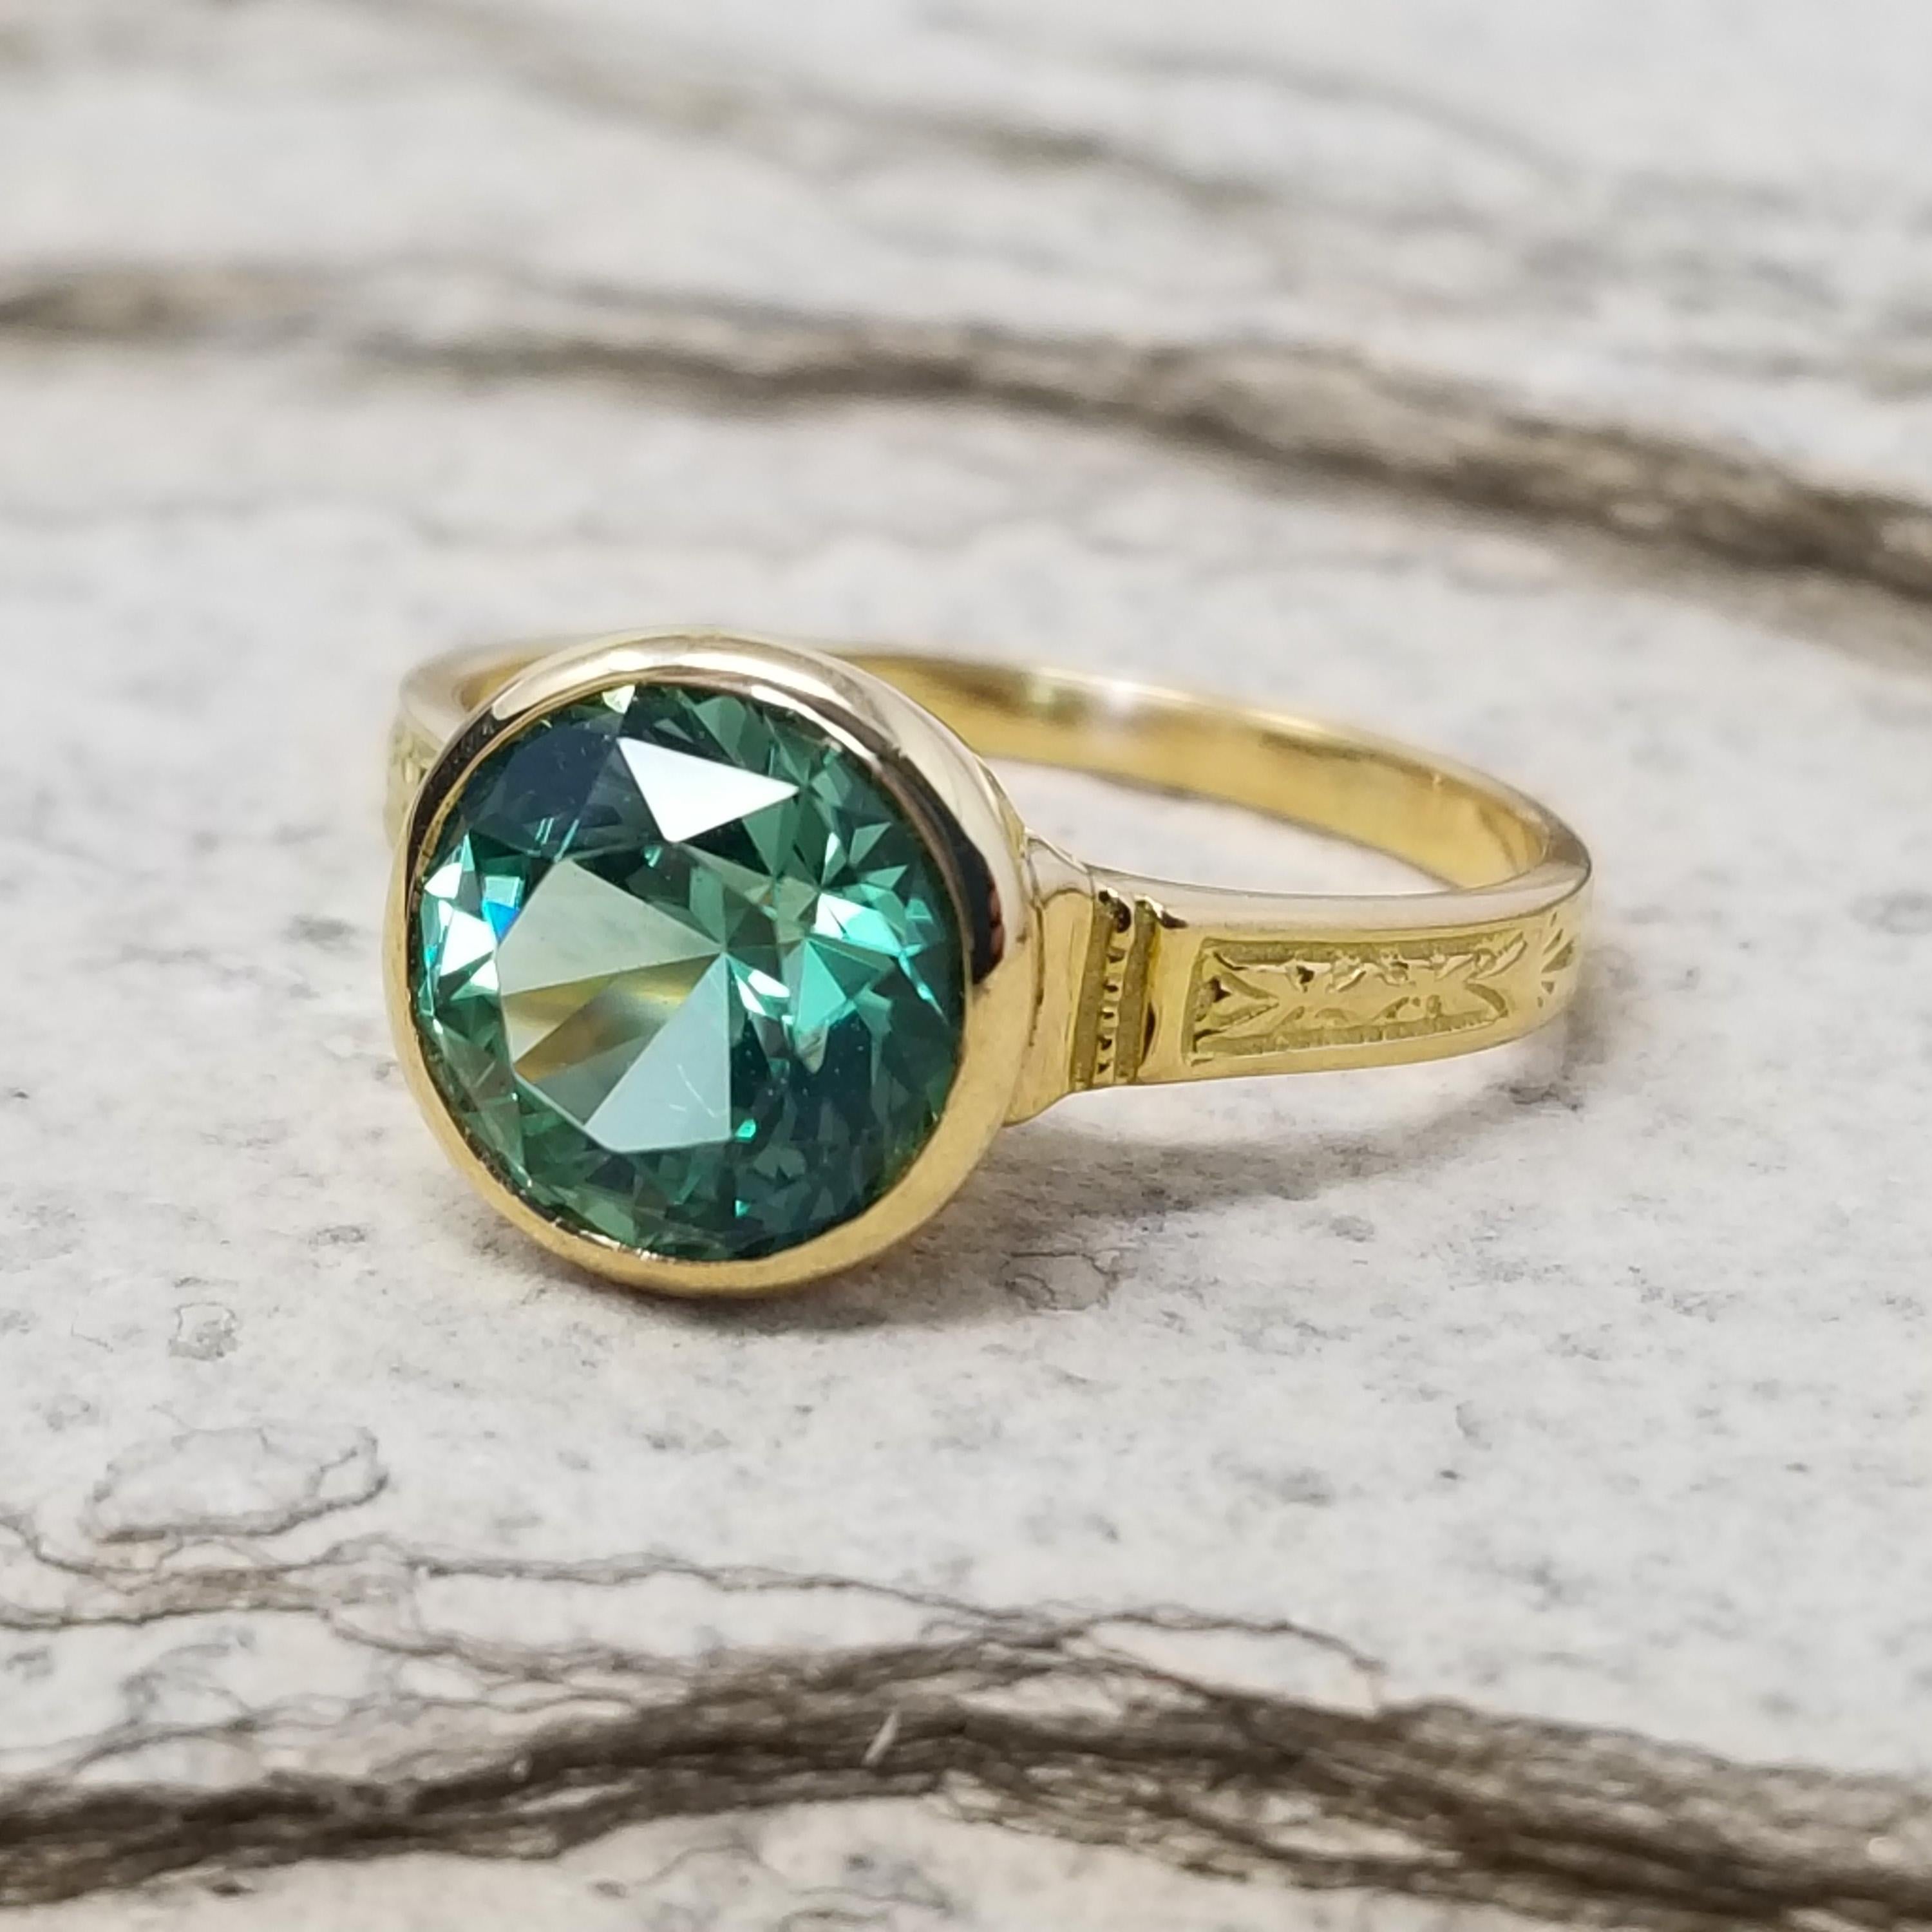 This stone absolutely astonishes in person; the precision cutting brings exceptional life to this tourmaline. The scintillation of this sparkling mint green tourmaline will draw attention whenever it's worn. 

